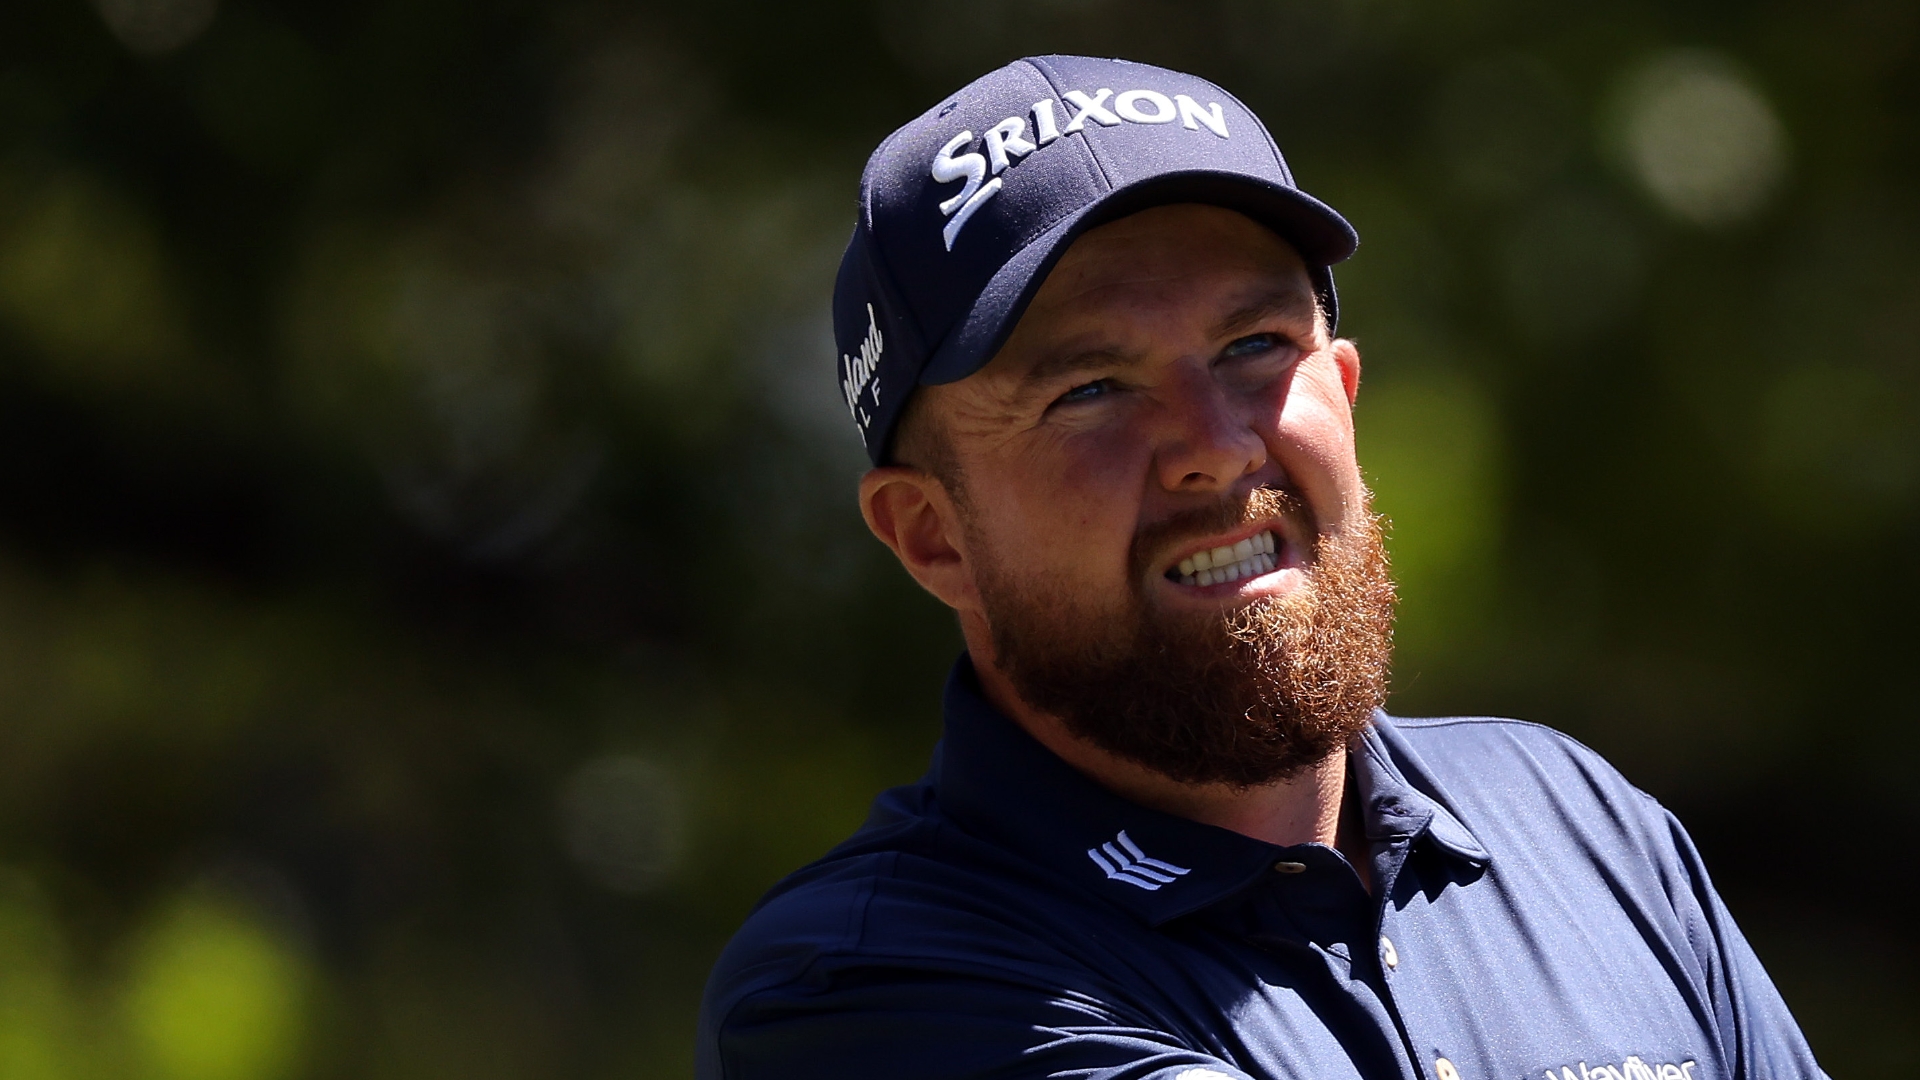 Shane Lowry holes out from the rough for incredible eagle